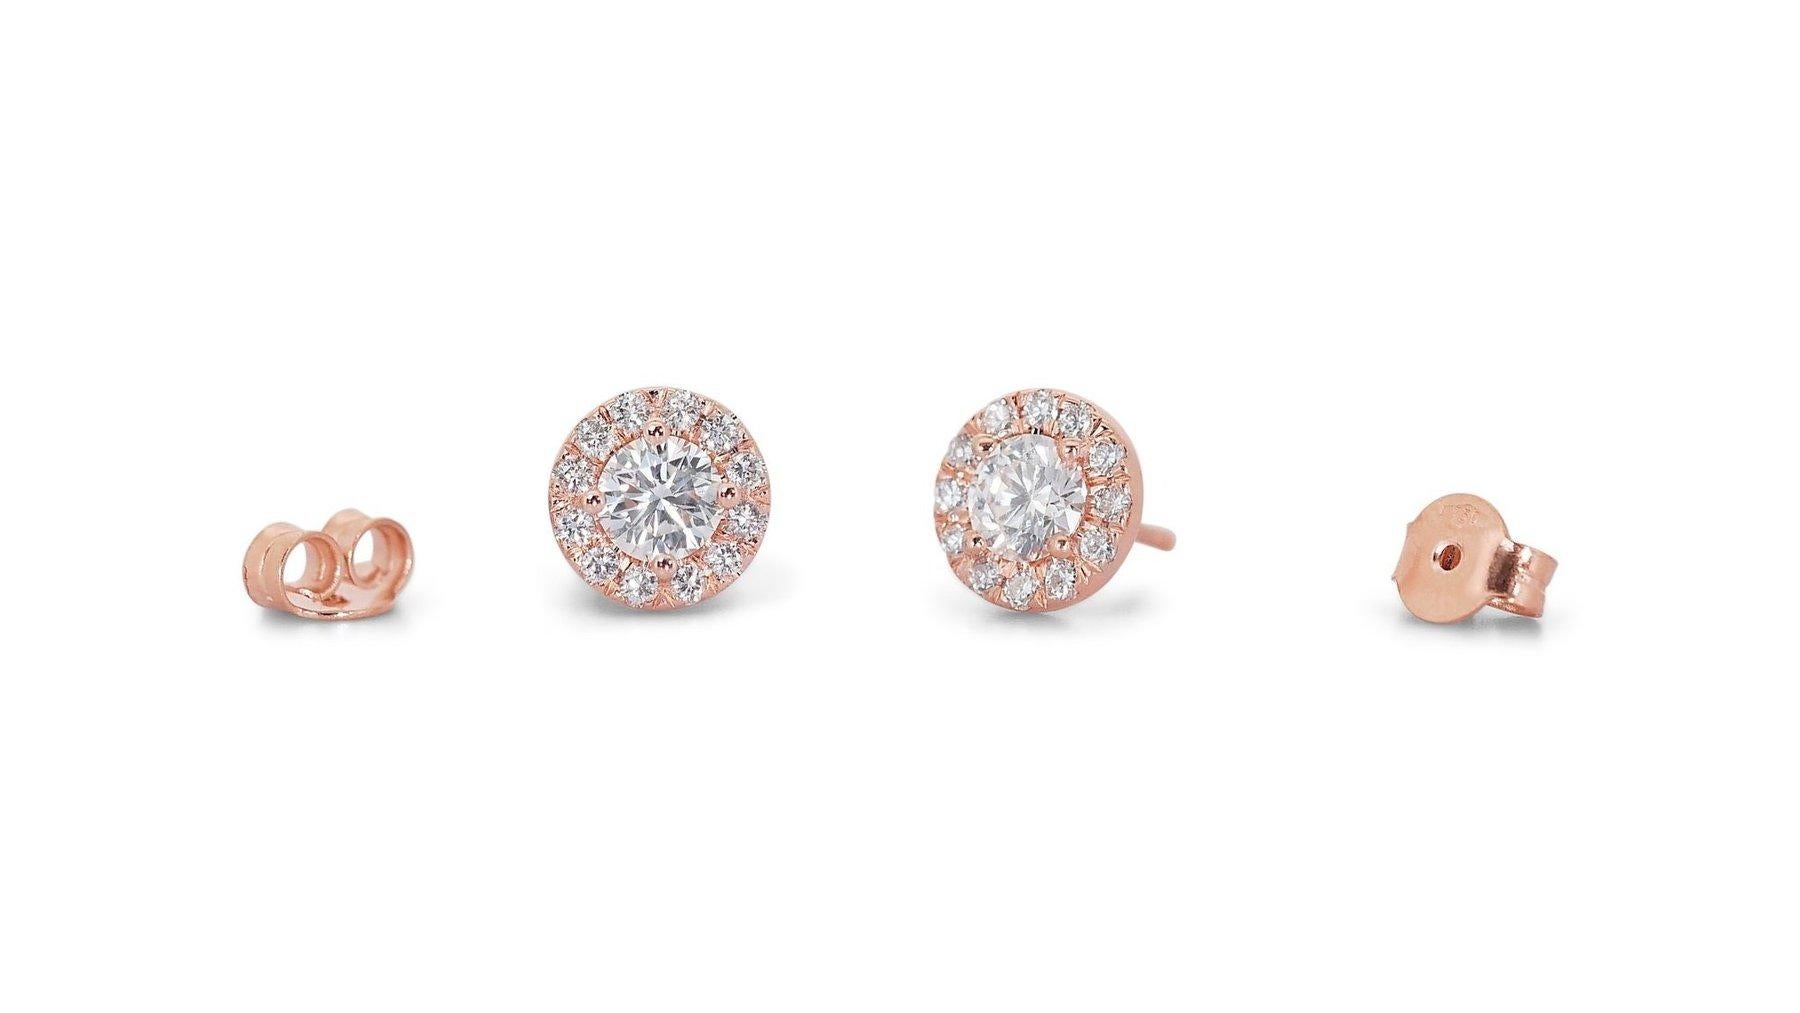 Sophisticated 2.31ct Diamonds Halo Stud Earrings in 18k Rose Gold - GIA  For Sale 2